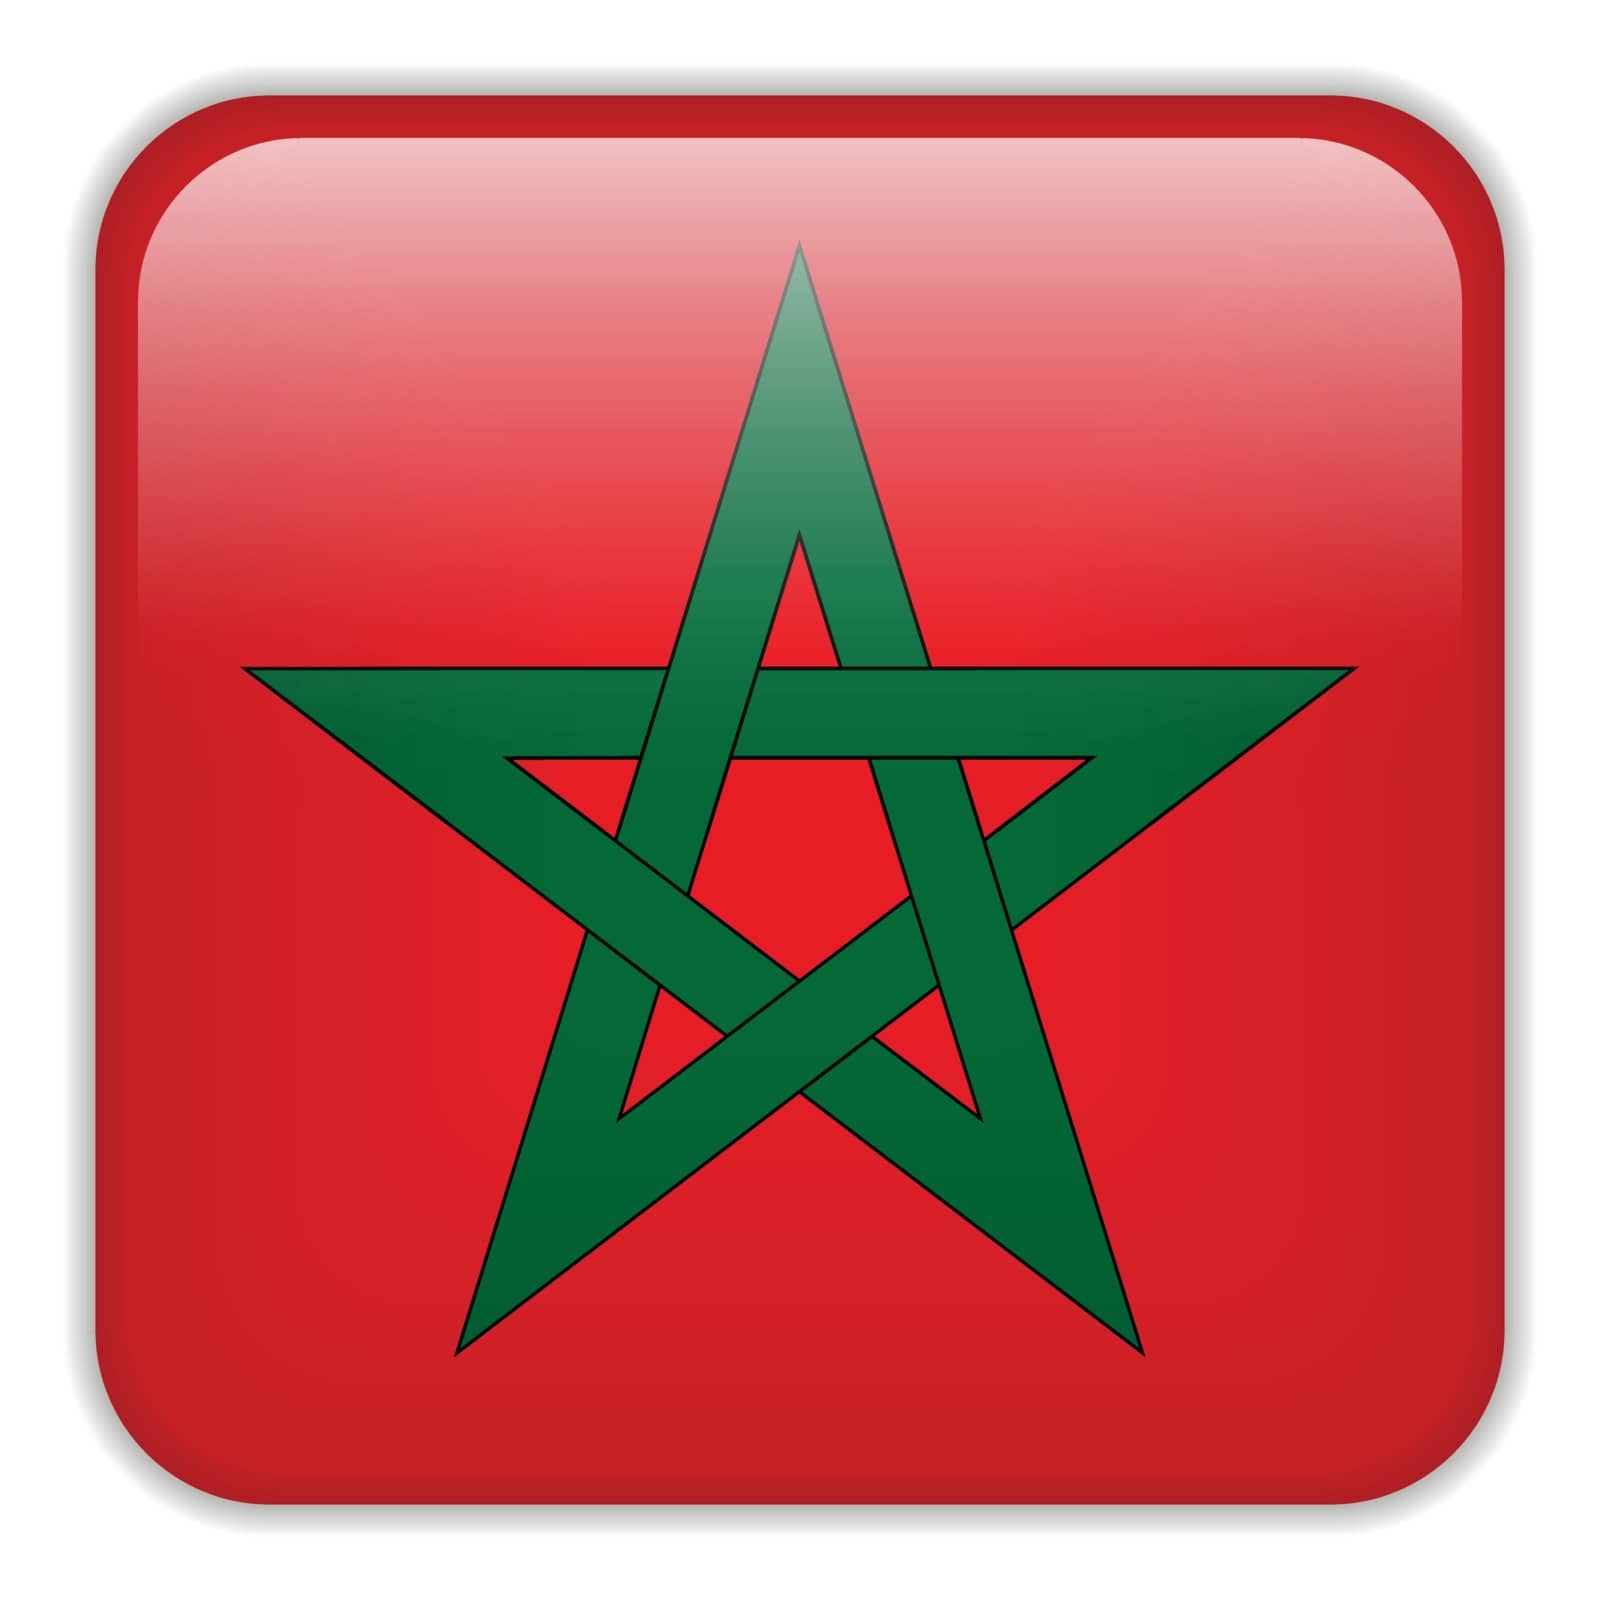 Morocco Flag Smartphone Application Square Buttons by gubh83